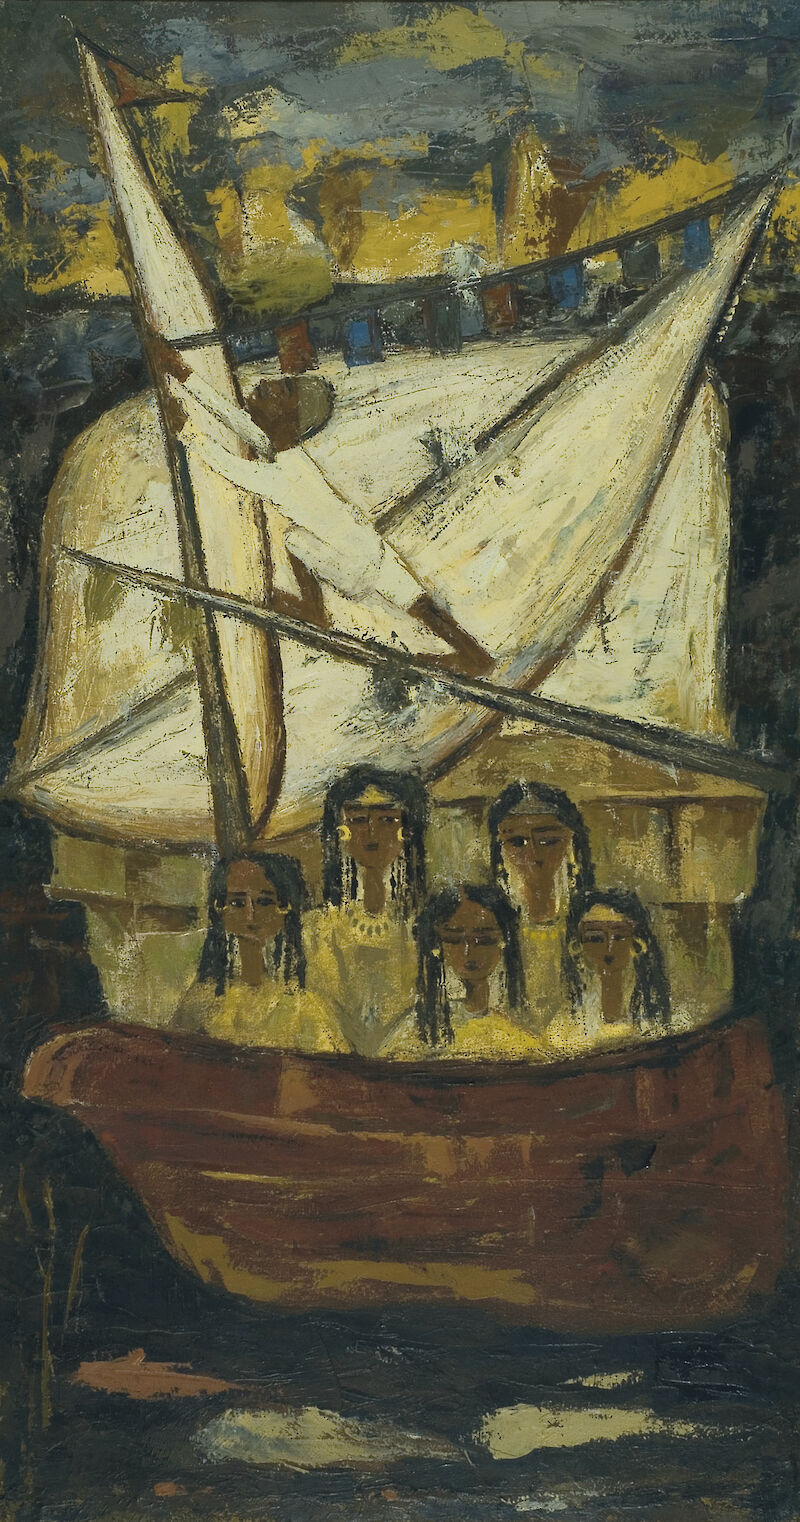 Girls on a Felucca scale comparison